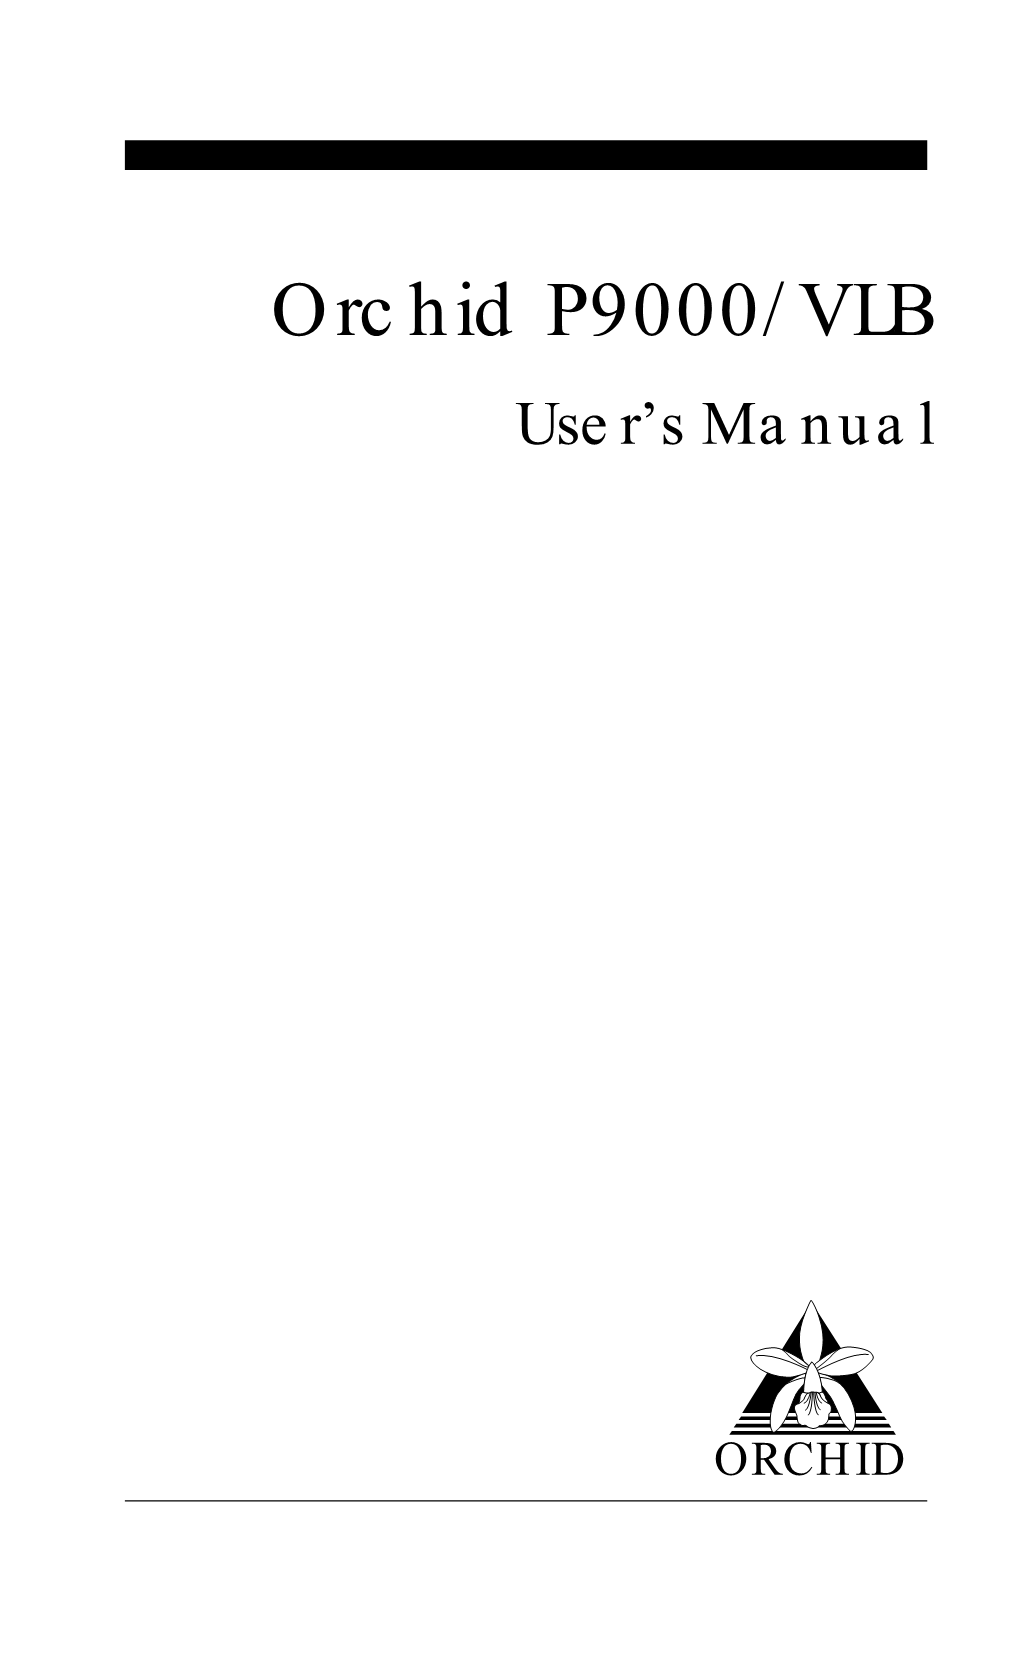 Orchid P9000/VLB User’S Manual